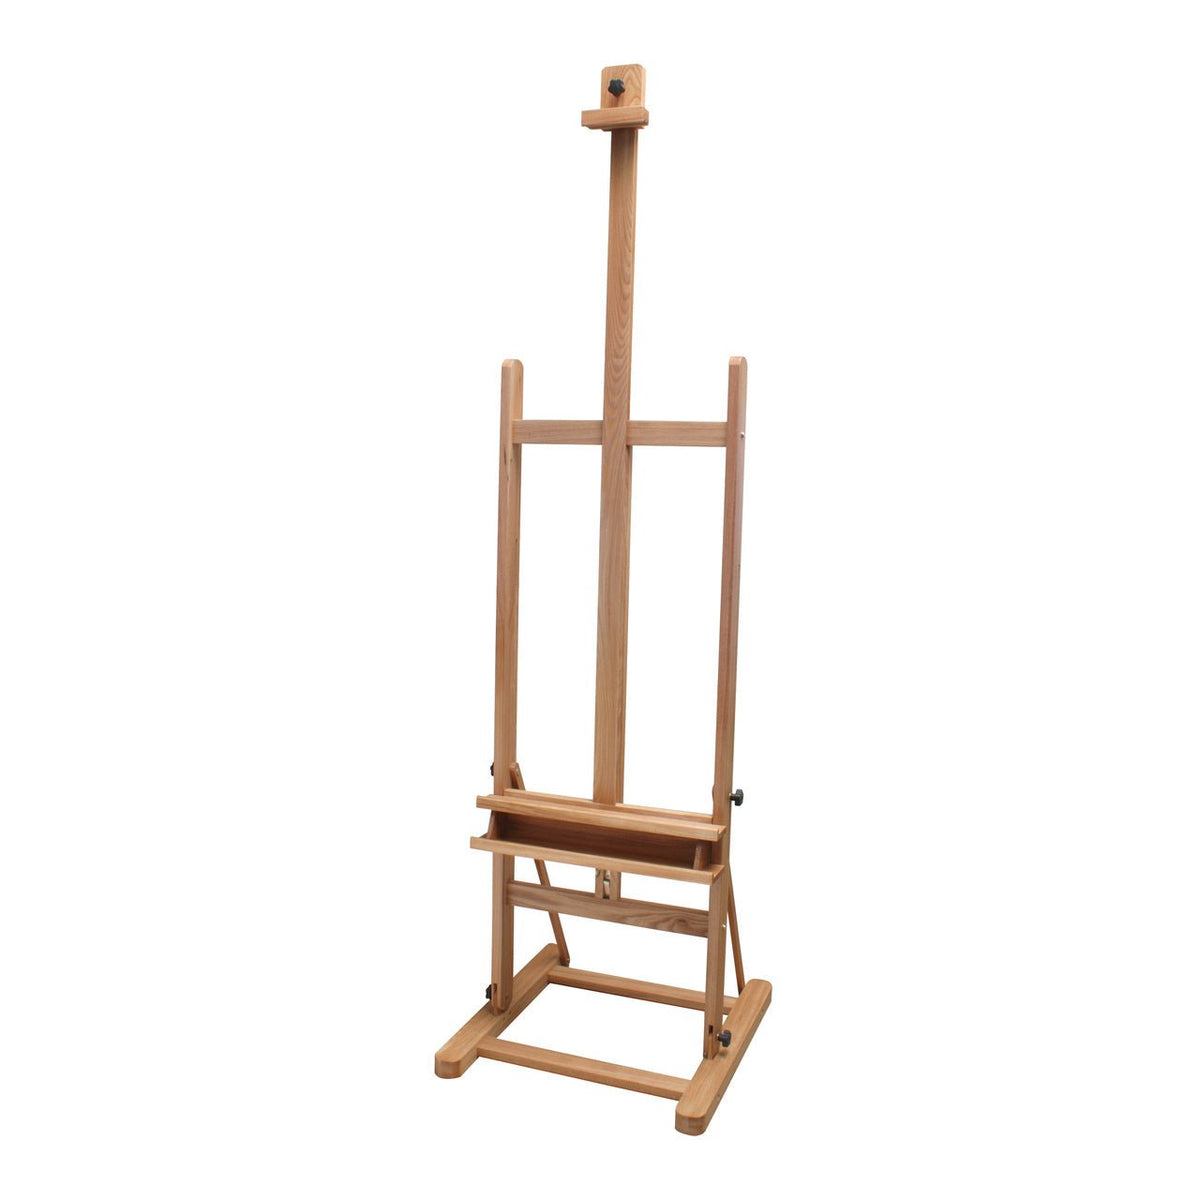 Art Alternatives Classic Studio Easel (assembly required)